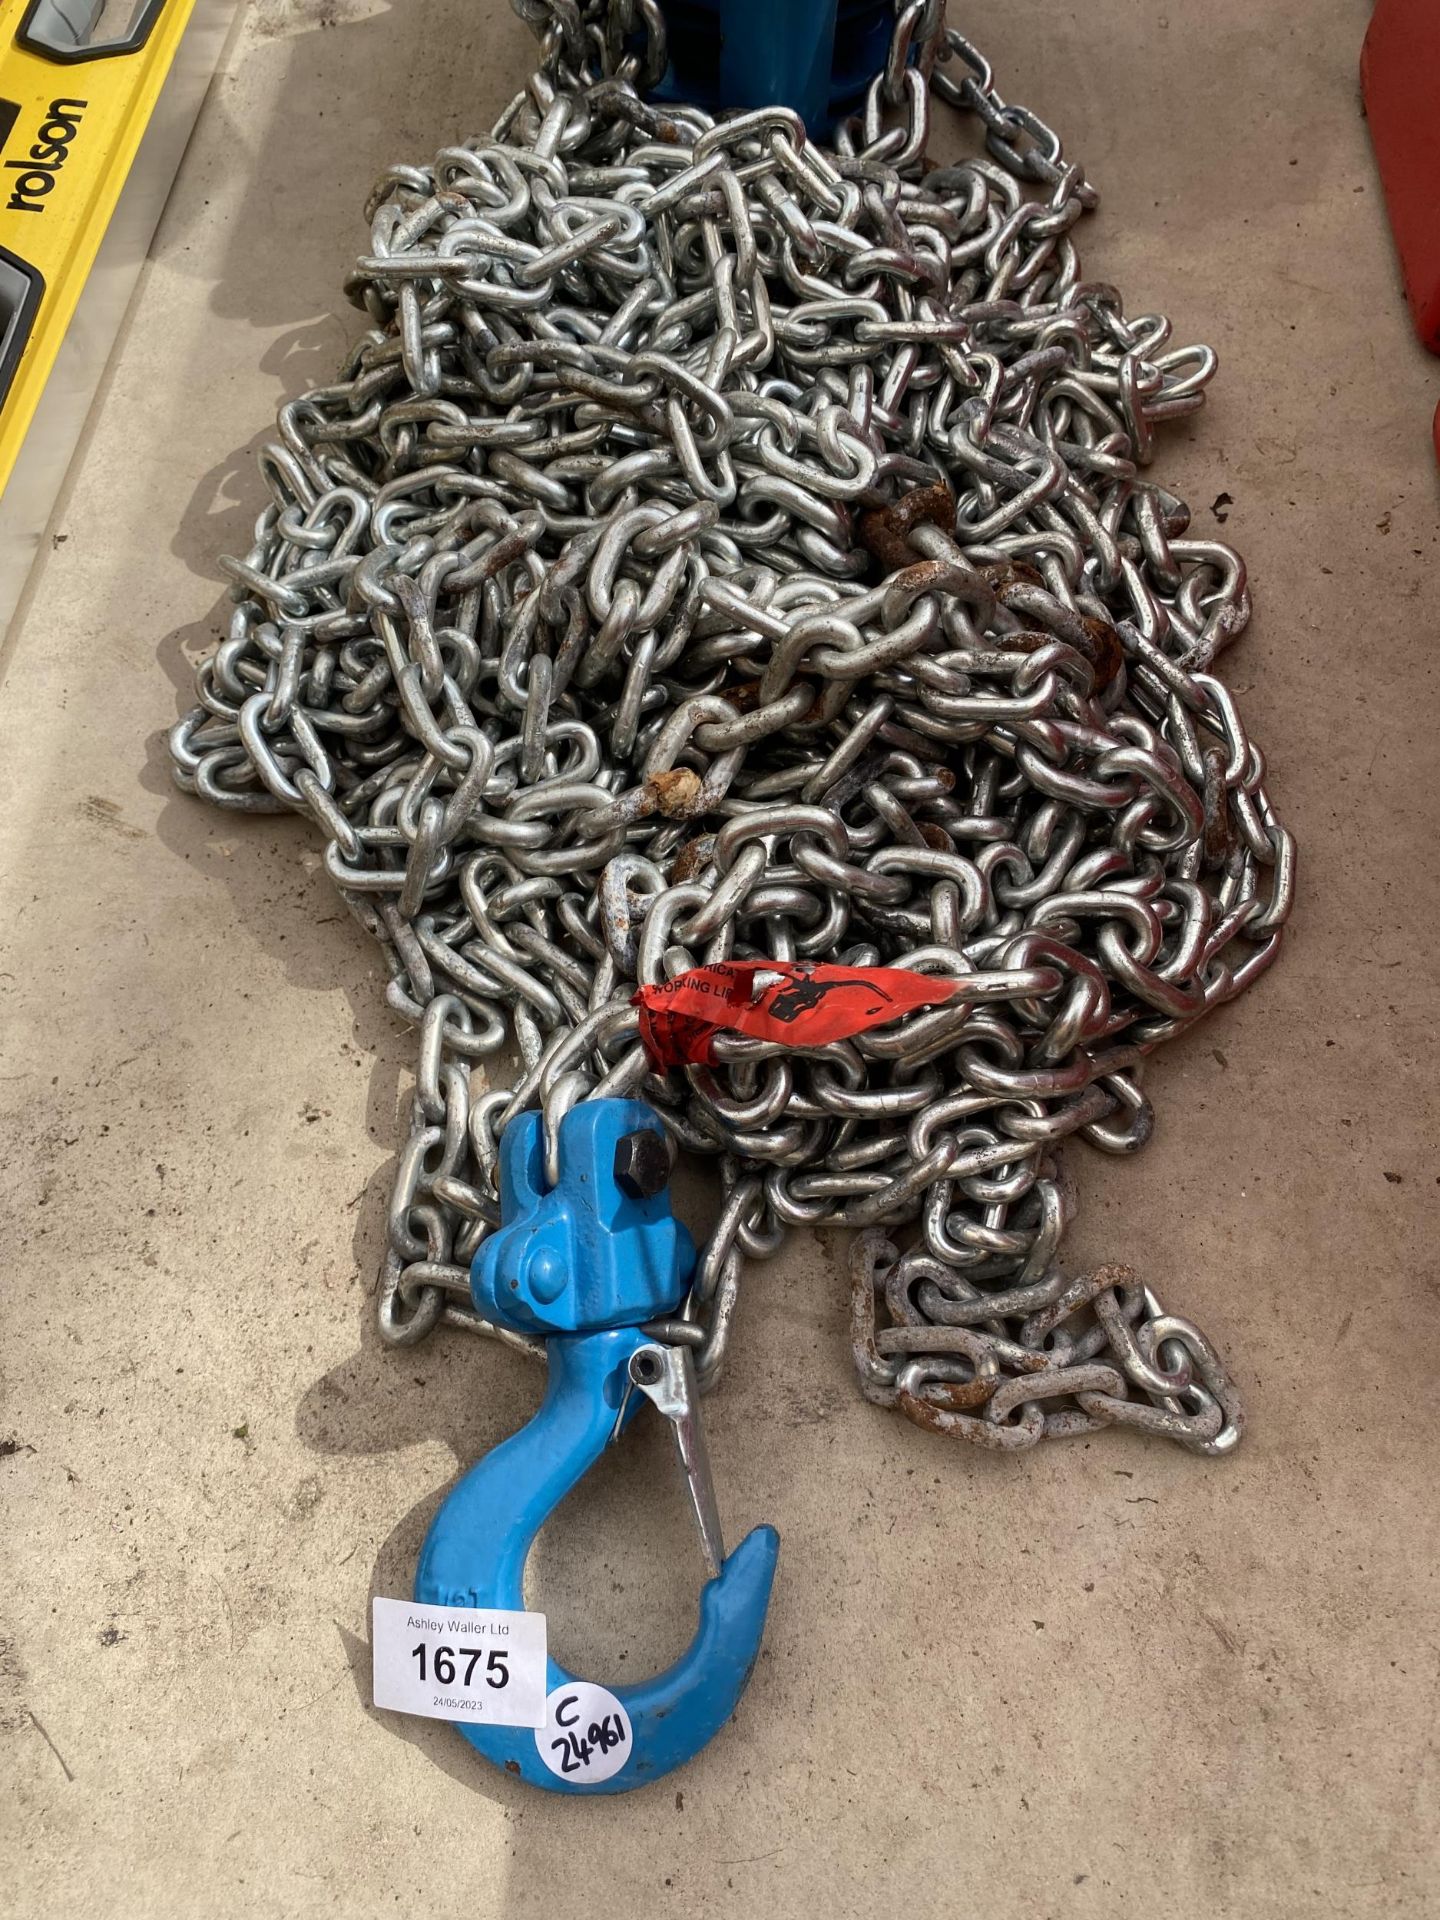 A LARGE PFAFF 0.5T BLOCK & TACKLE CHAIN AND HOOK - Image 3 of 3